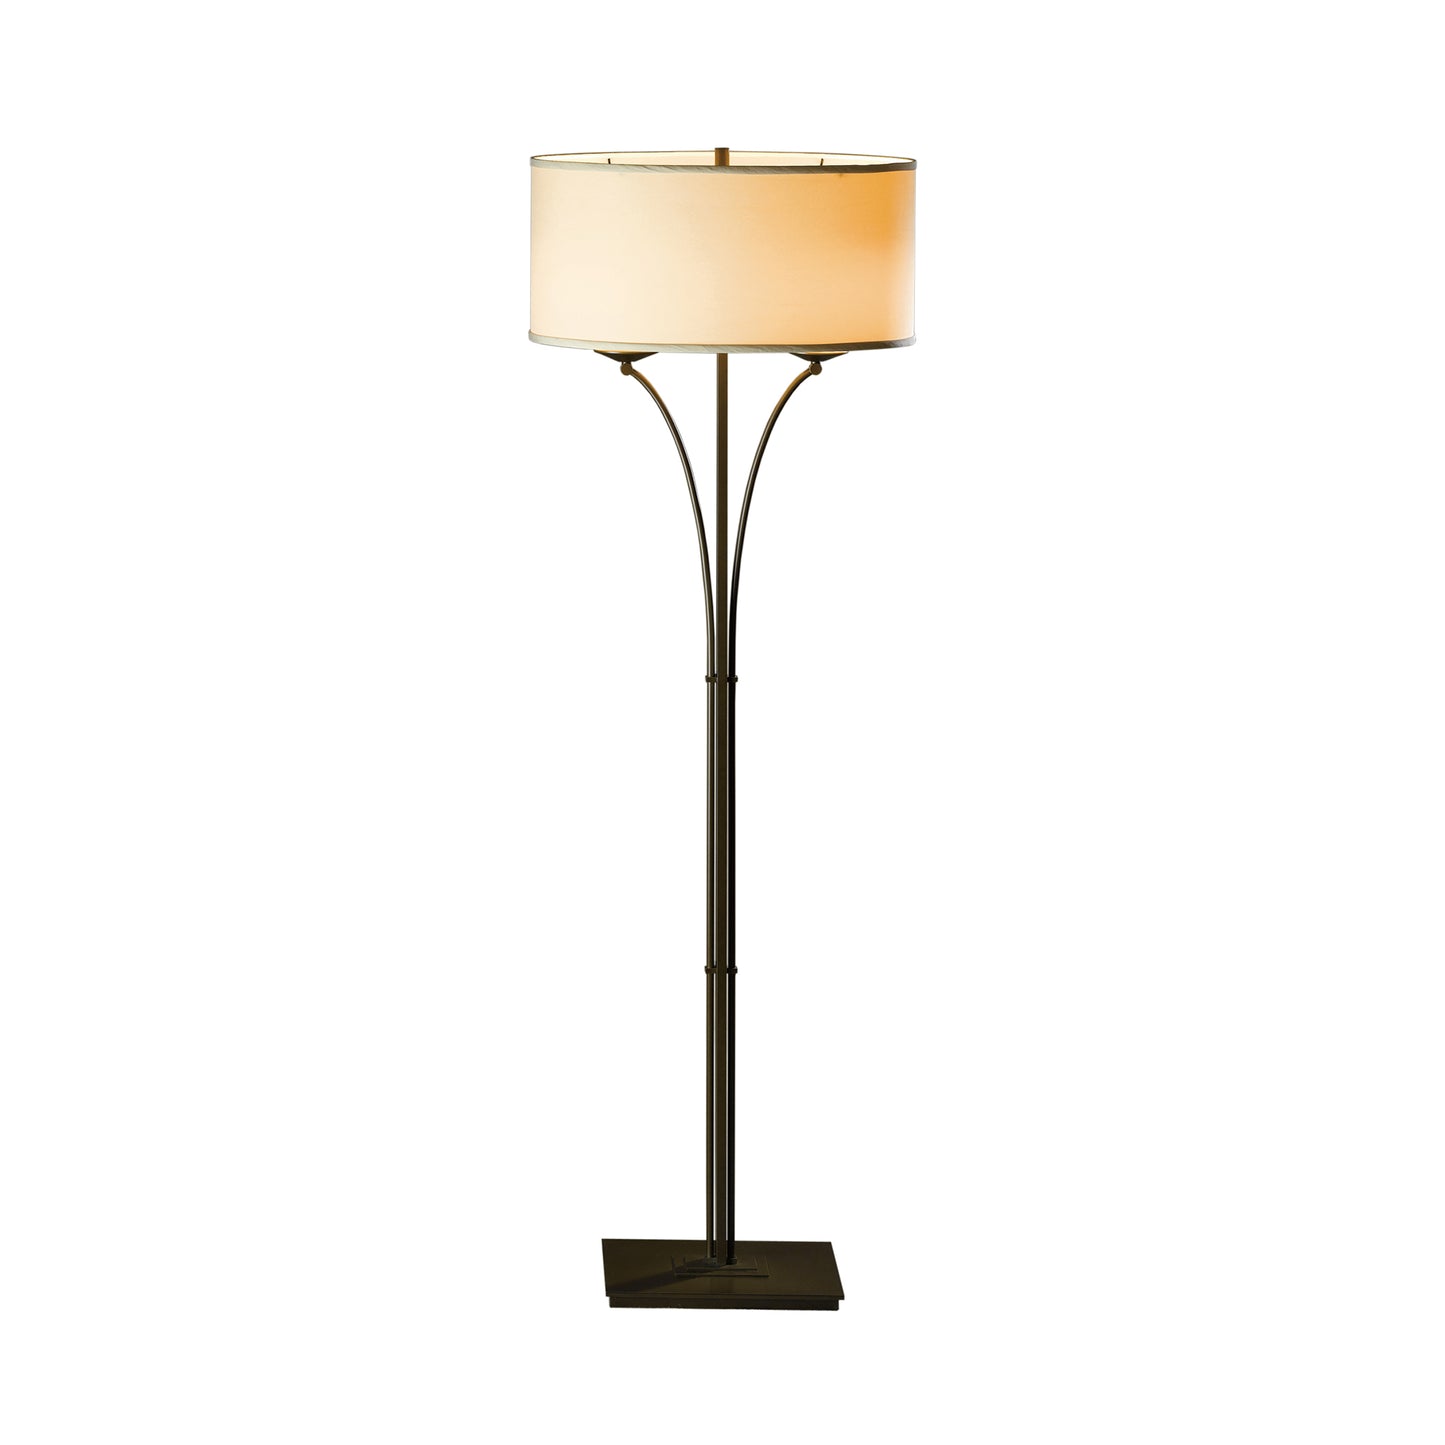 A Formae Contemporary Floor Lamp with a beige shade and a zen-like feel on a white background by Hubbardton Forge.